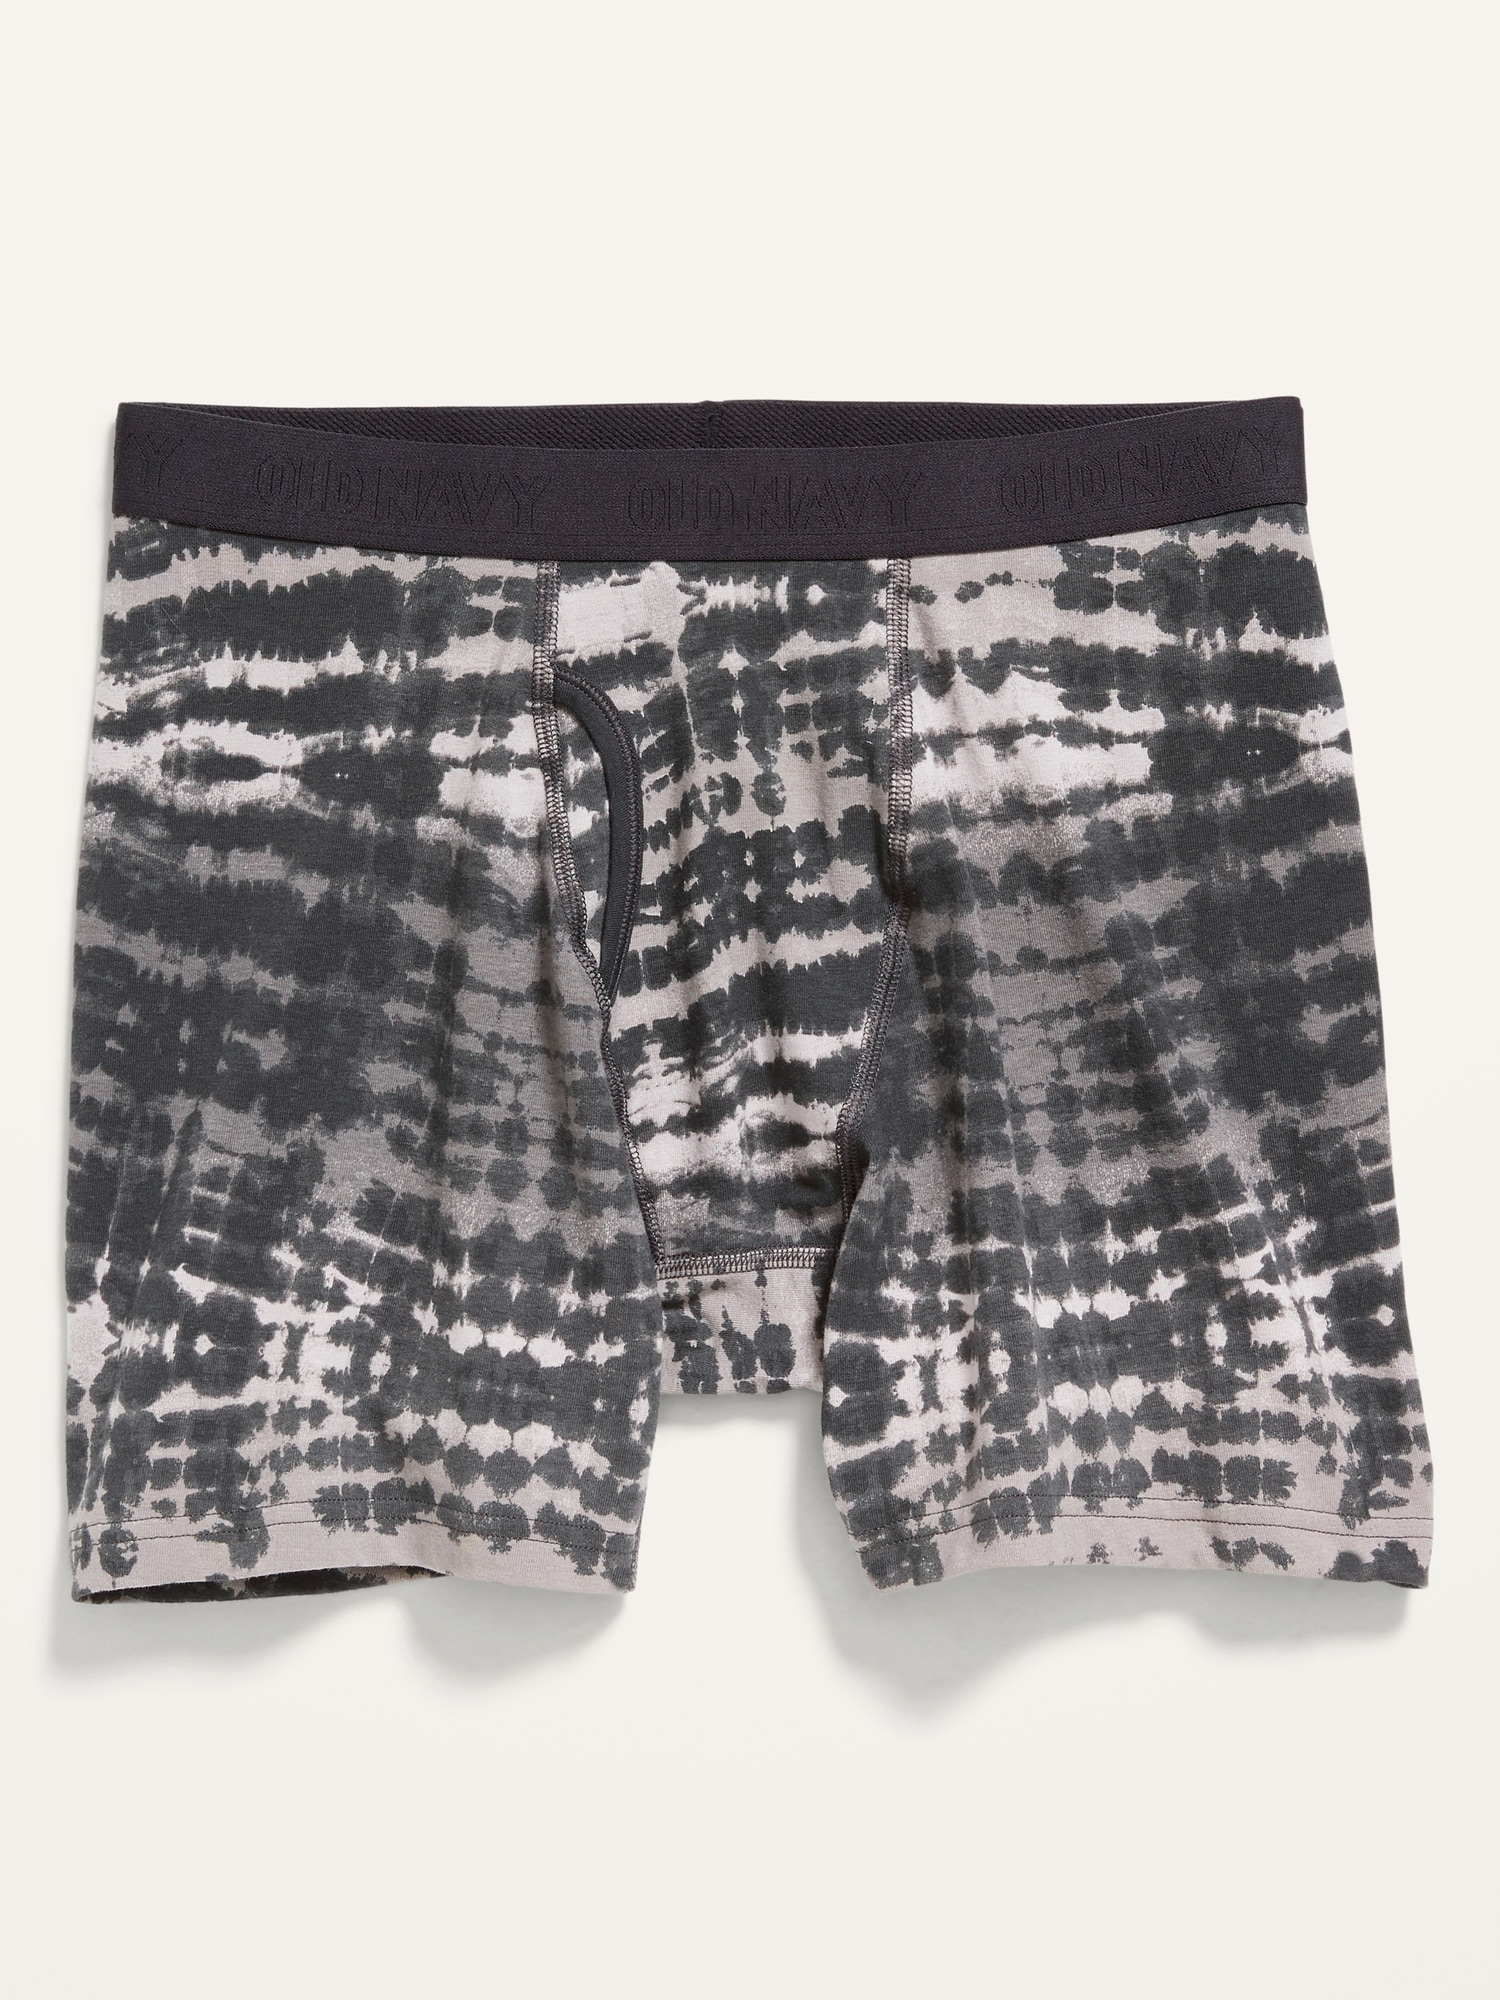 Soft-Washed Printed Boxer Briefs for Men